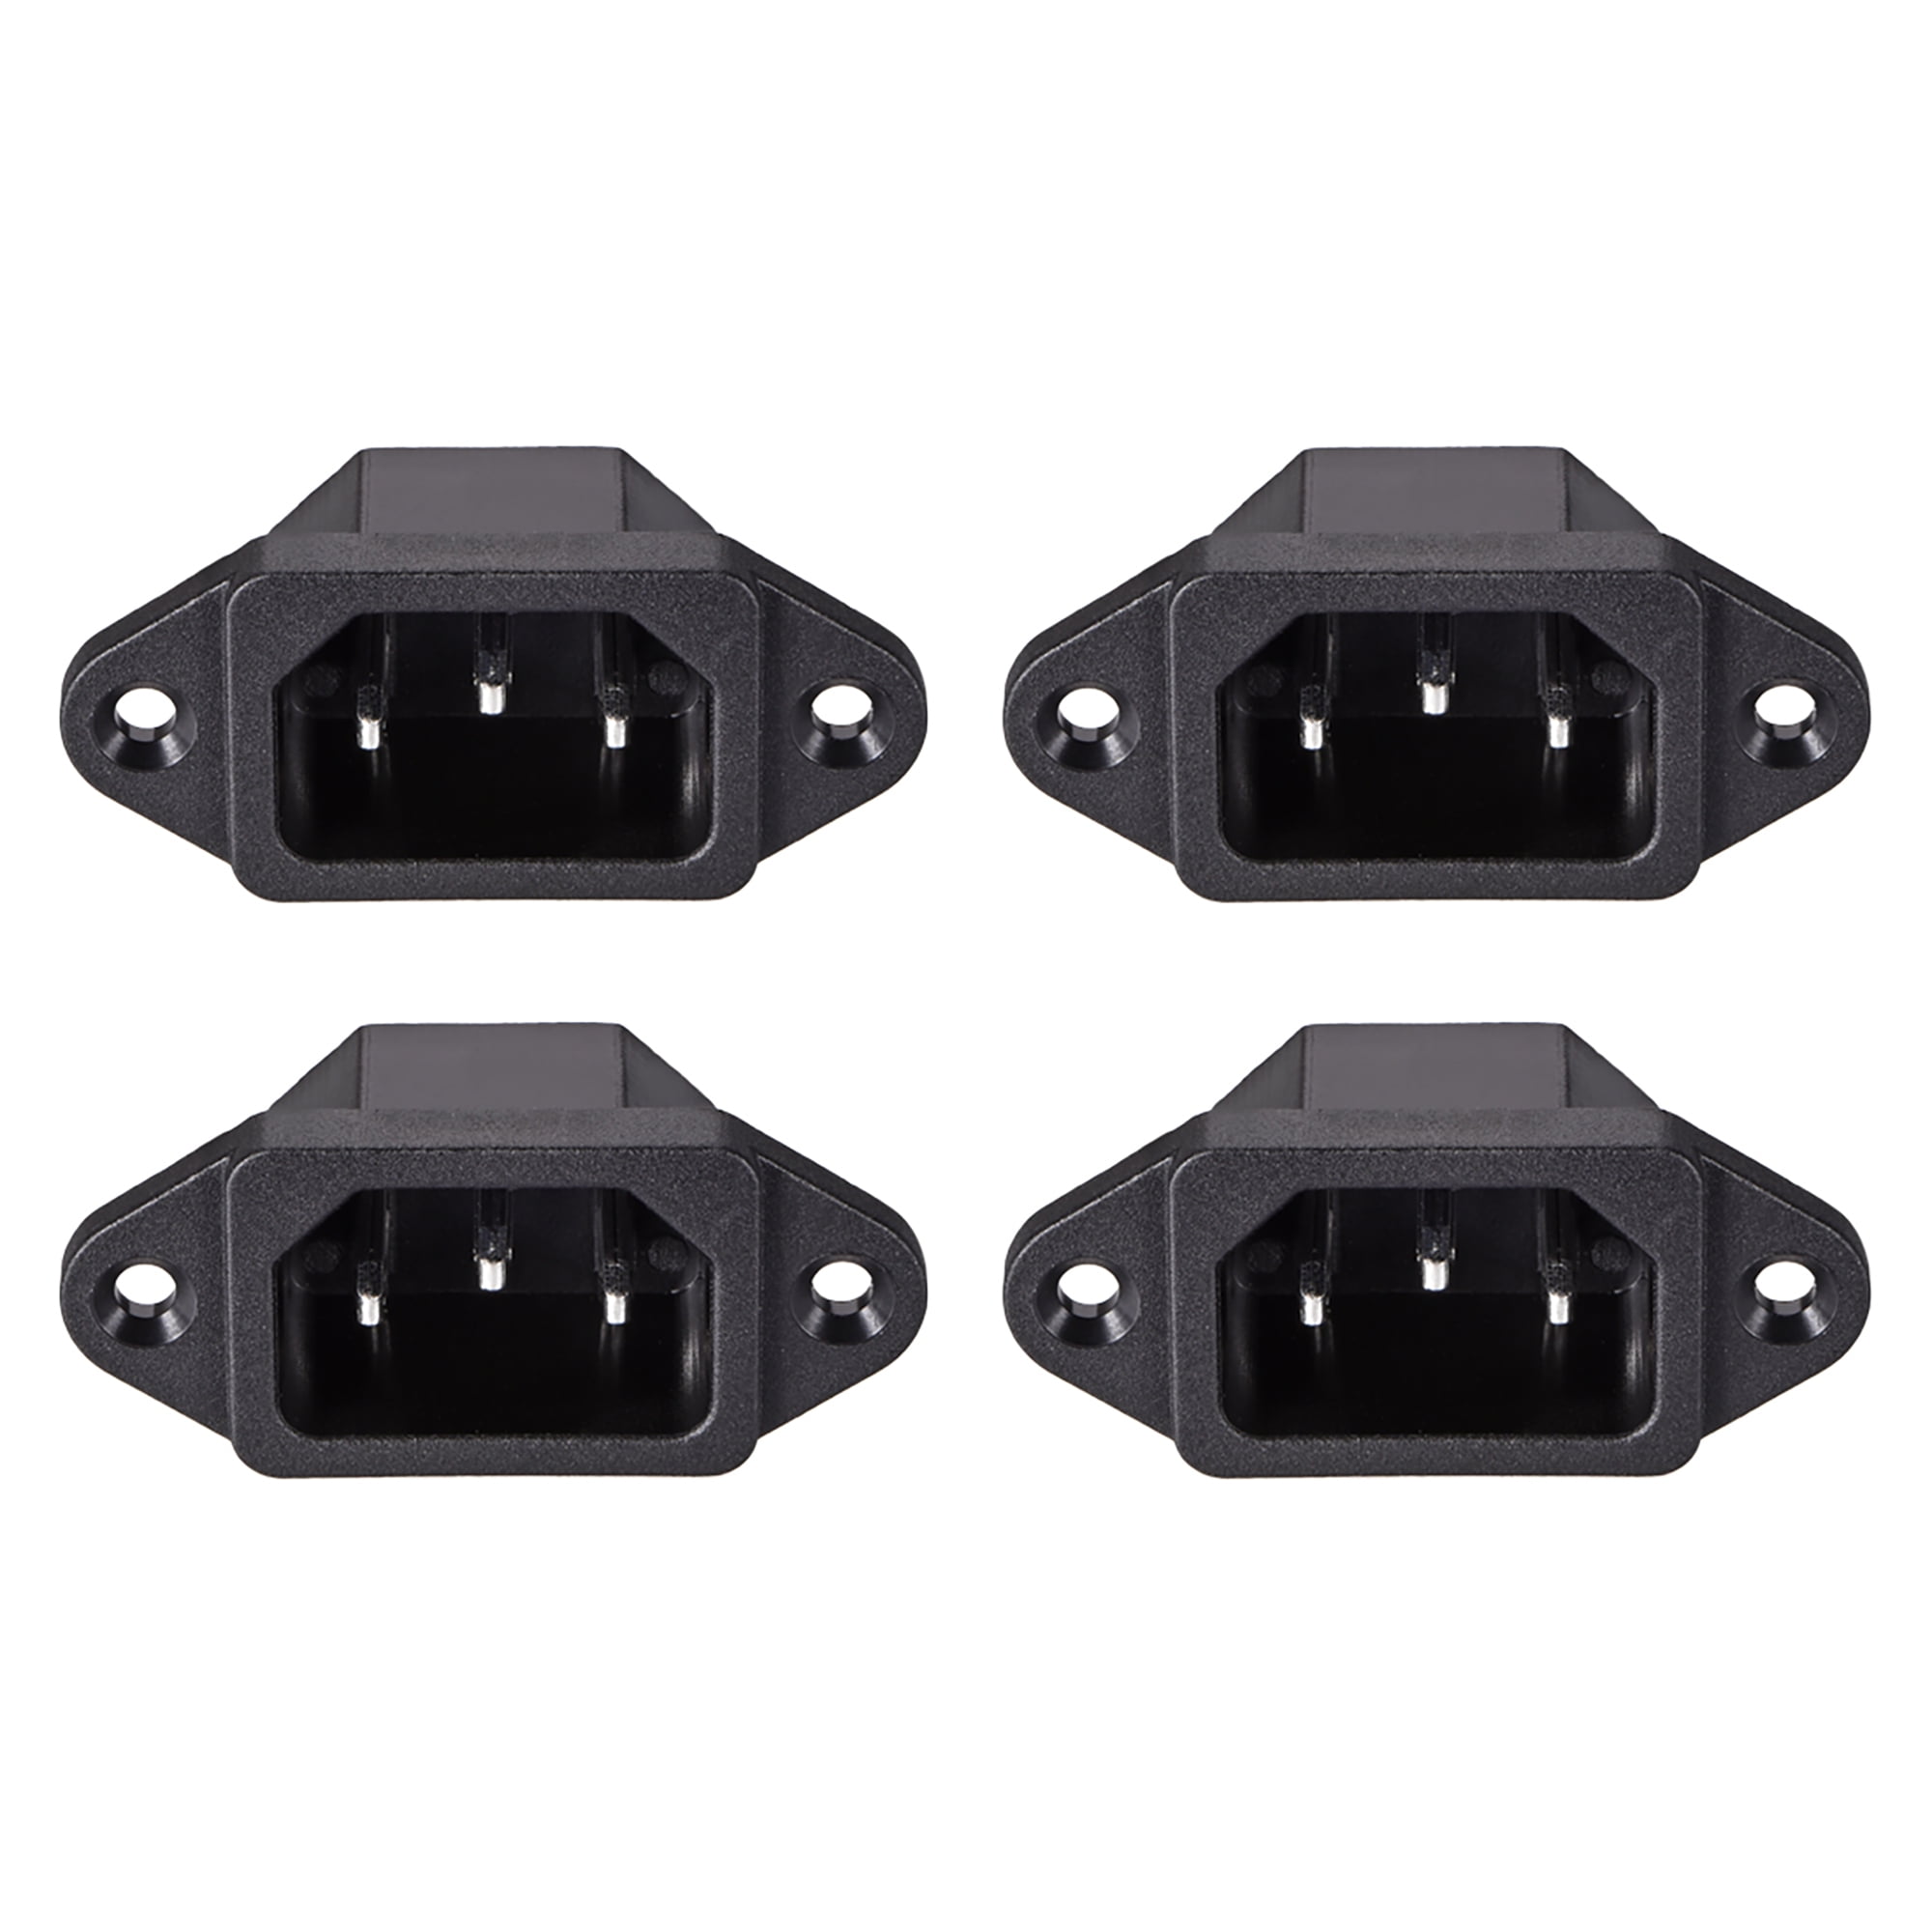 uxcell C14 Panel Mount Plug Adapter AC 250V 10A 3 Pins IEC Inlet Module Plug Power Connector Socket with 3 Wires Pack of 5 